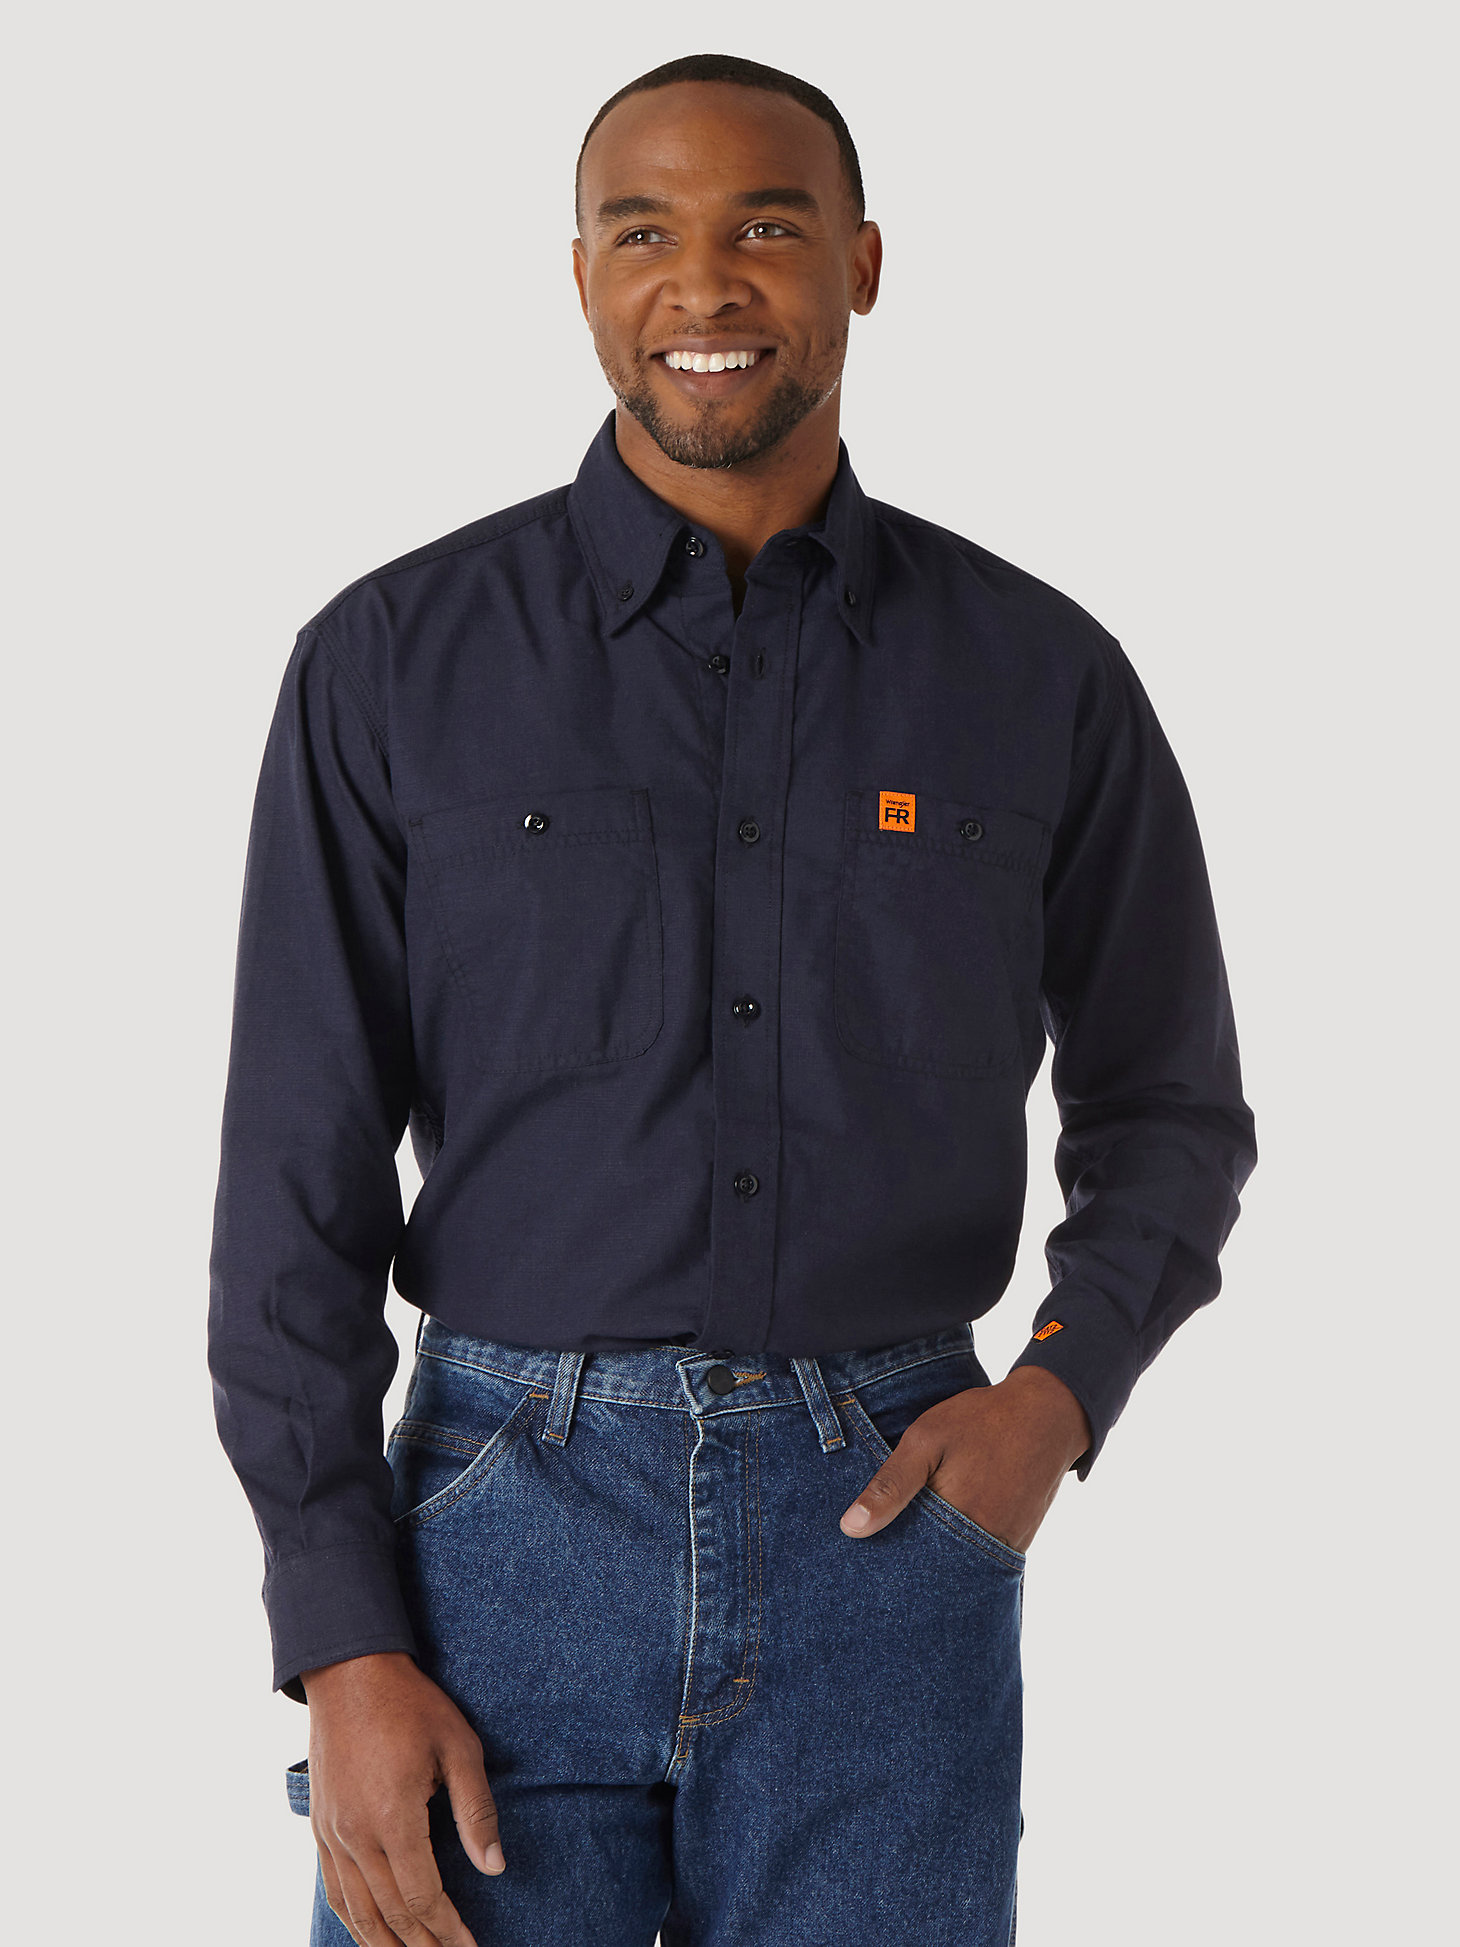 Wrangler® RIGGS Workwear® FR Flame Resistant Twill Solid Work Shirt in Navy alternative view 1